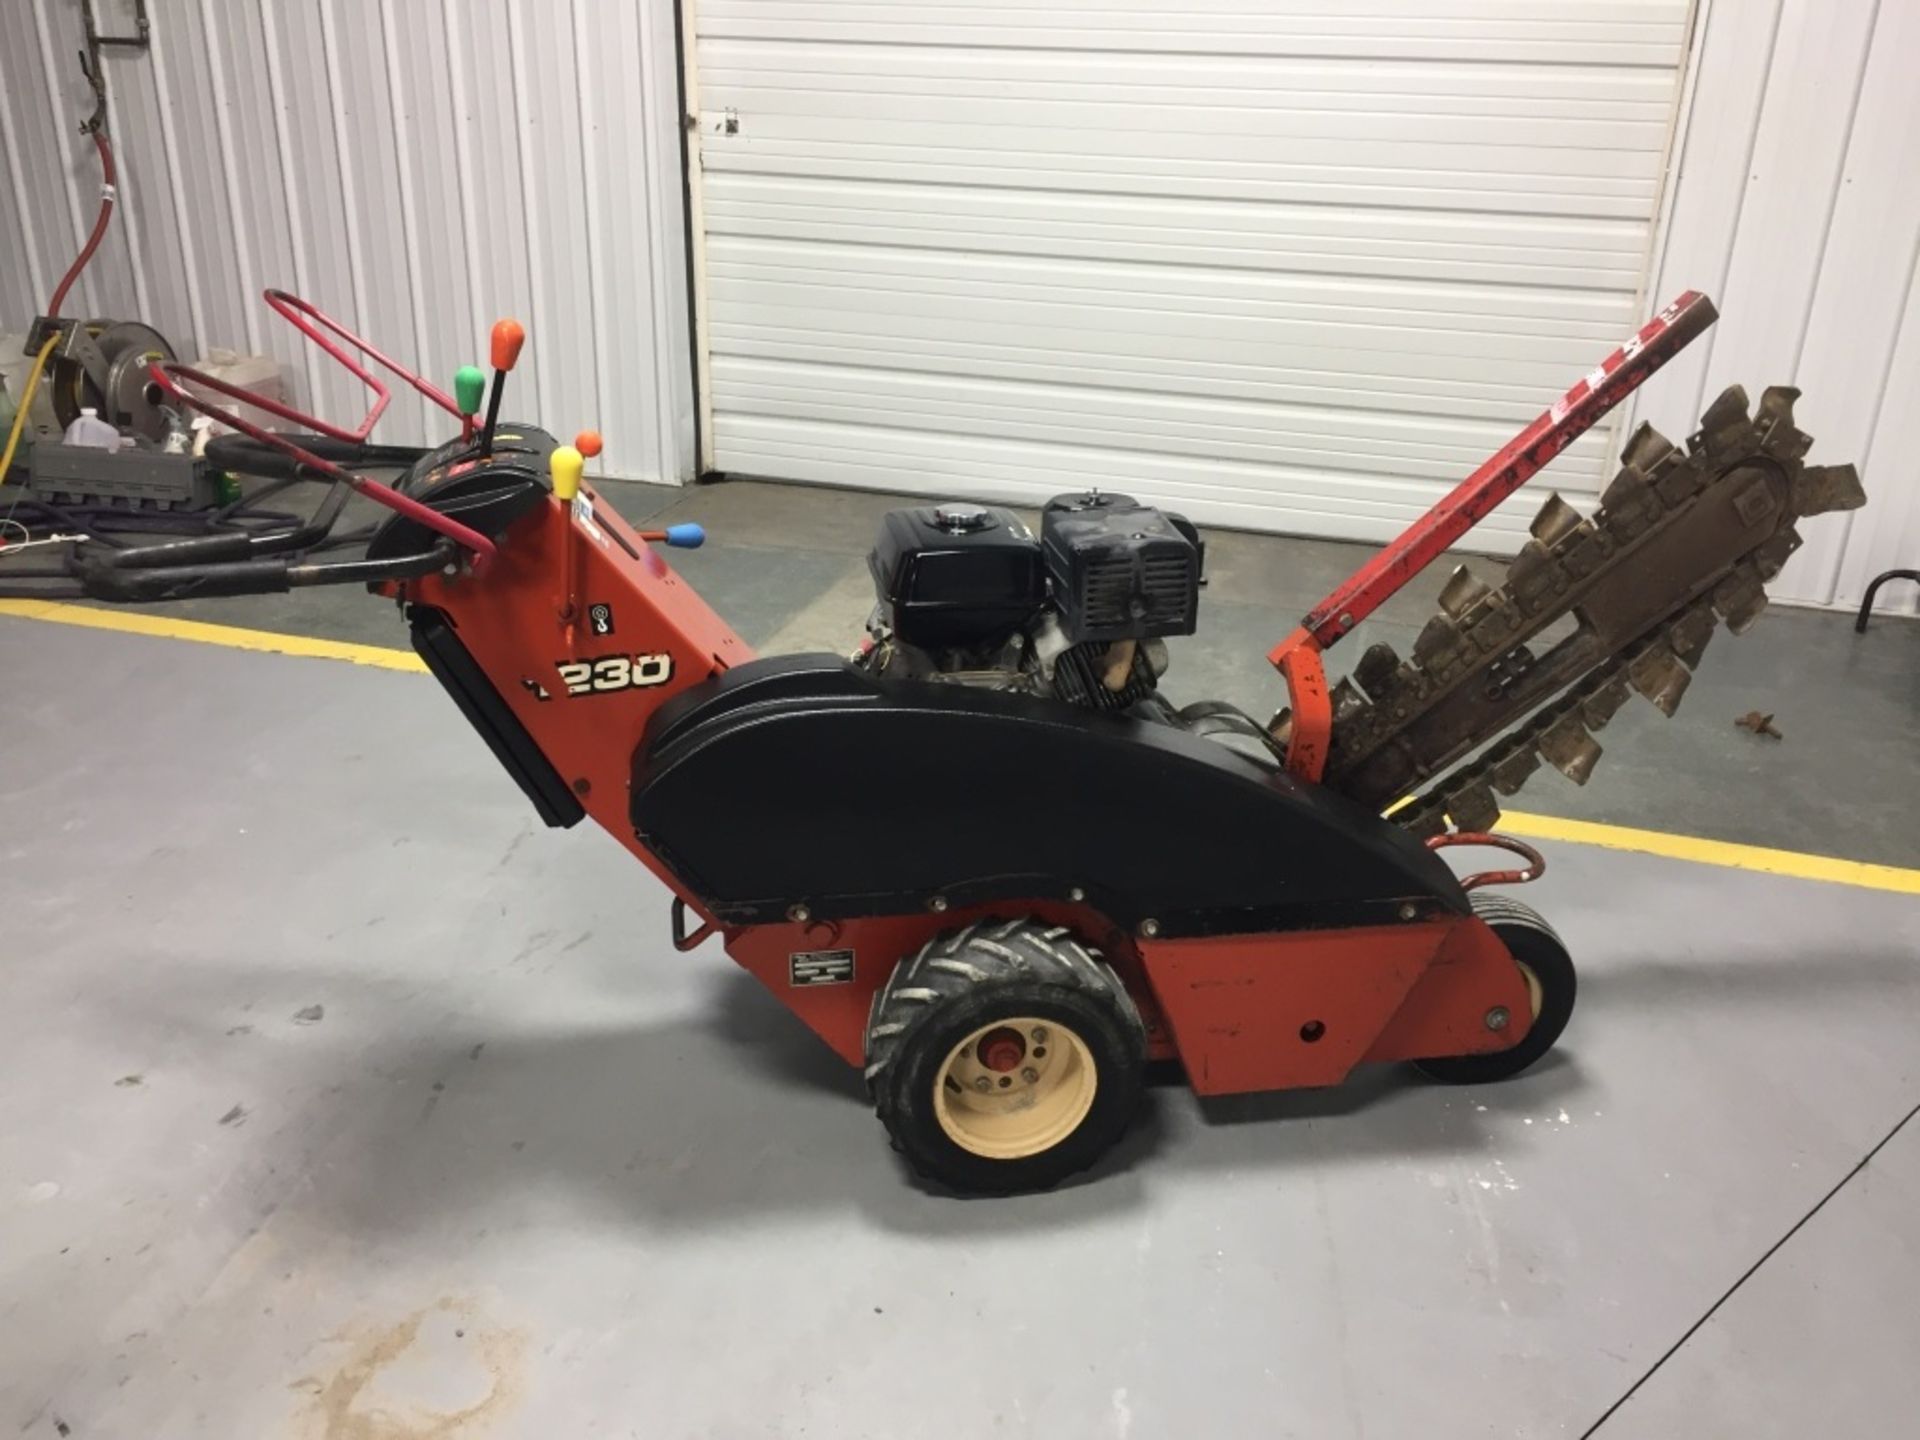 2007 Walk-behind Ditch Witch 1230 Trencher, Honda GX340, 11 HP - Image 4 of 5